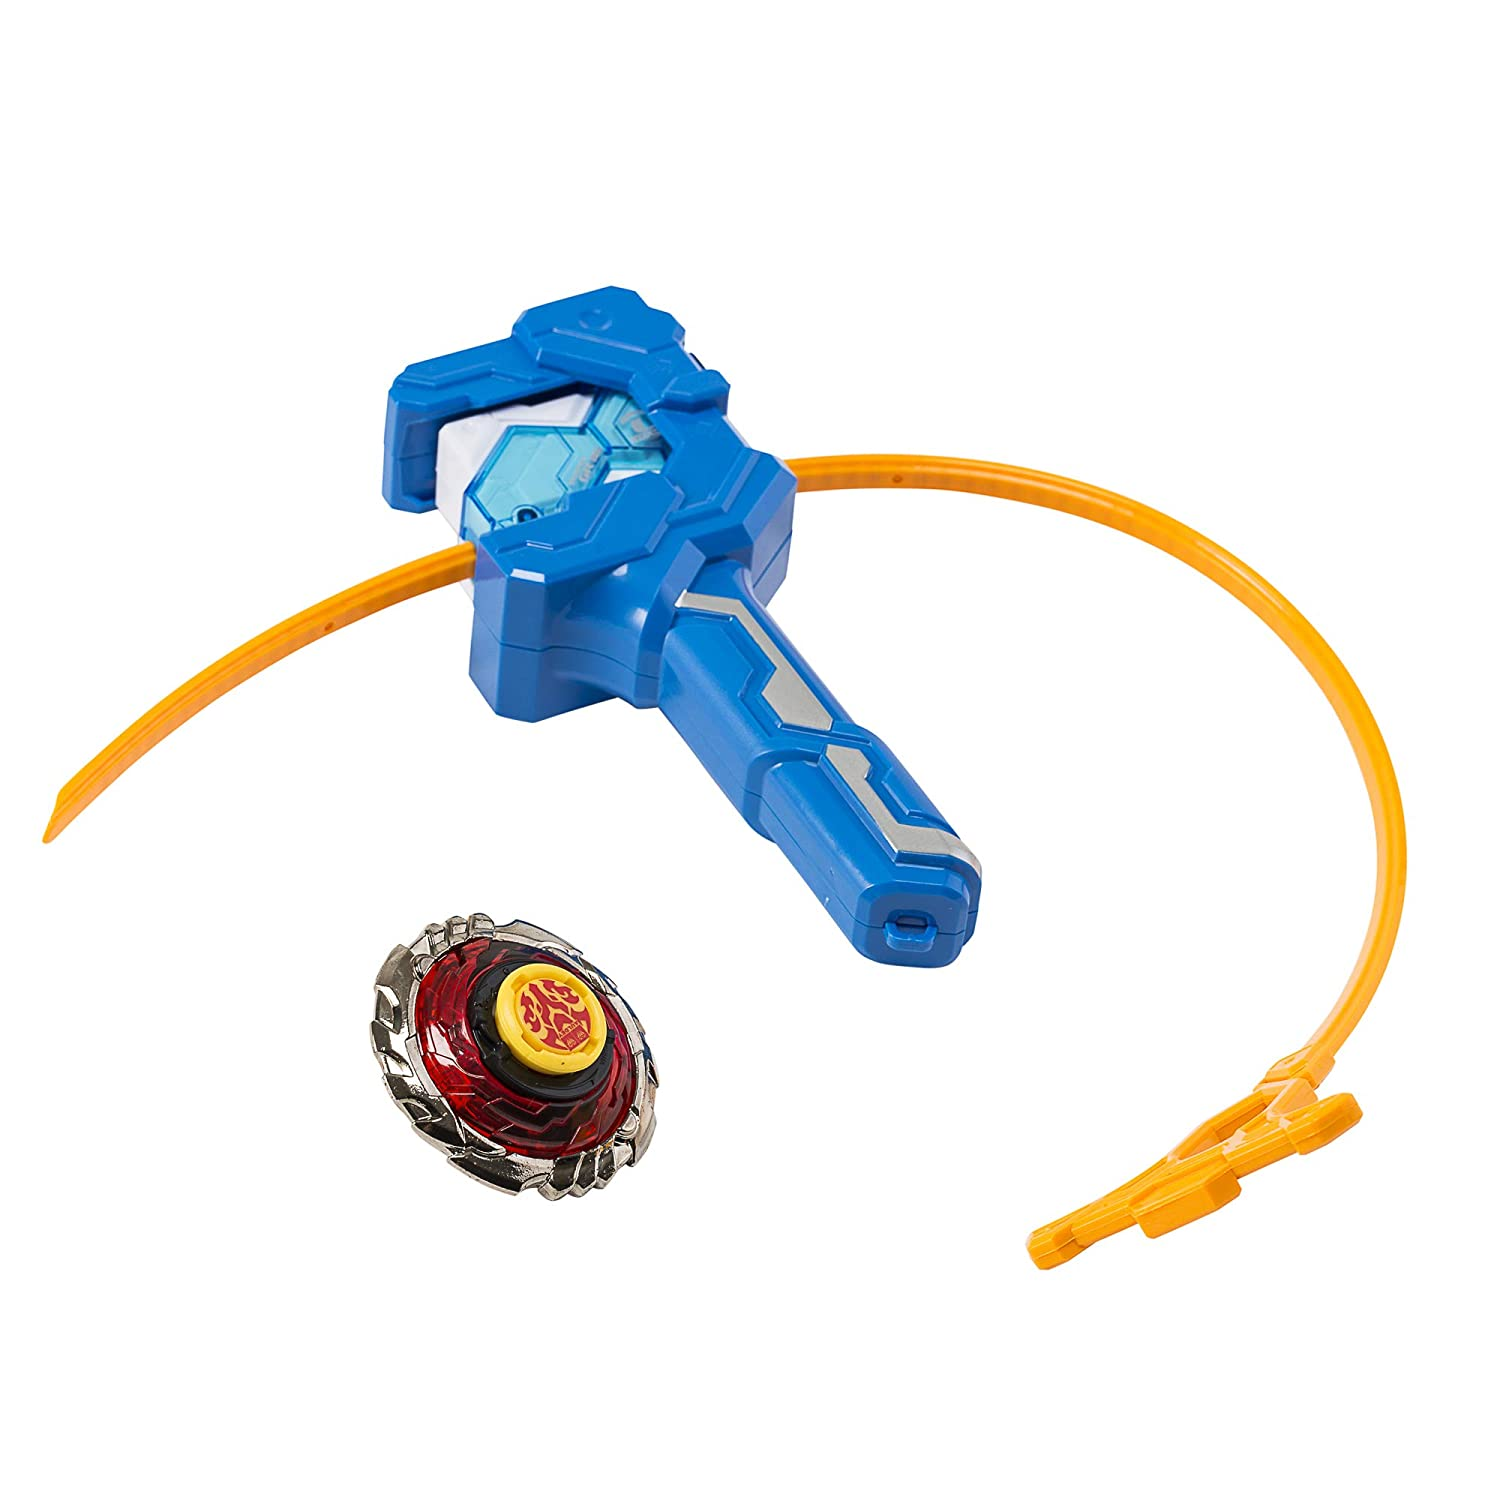 Color baby Infinity Nado Stadium With 2 Spinning Tops And 2 Launchers  Multicolor